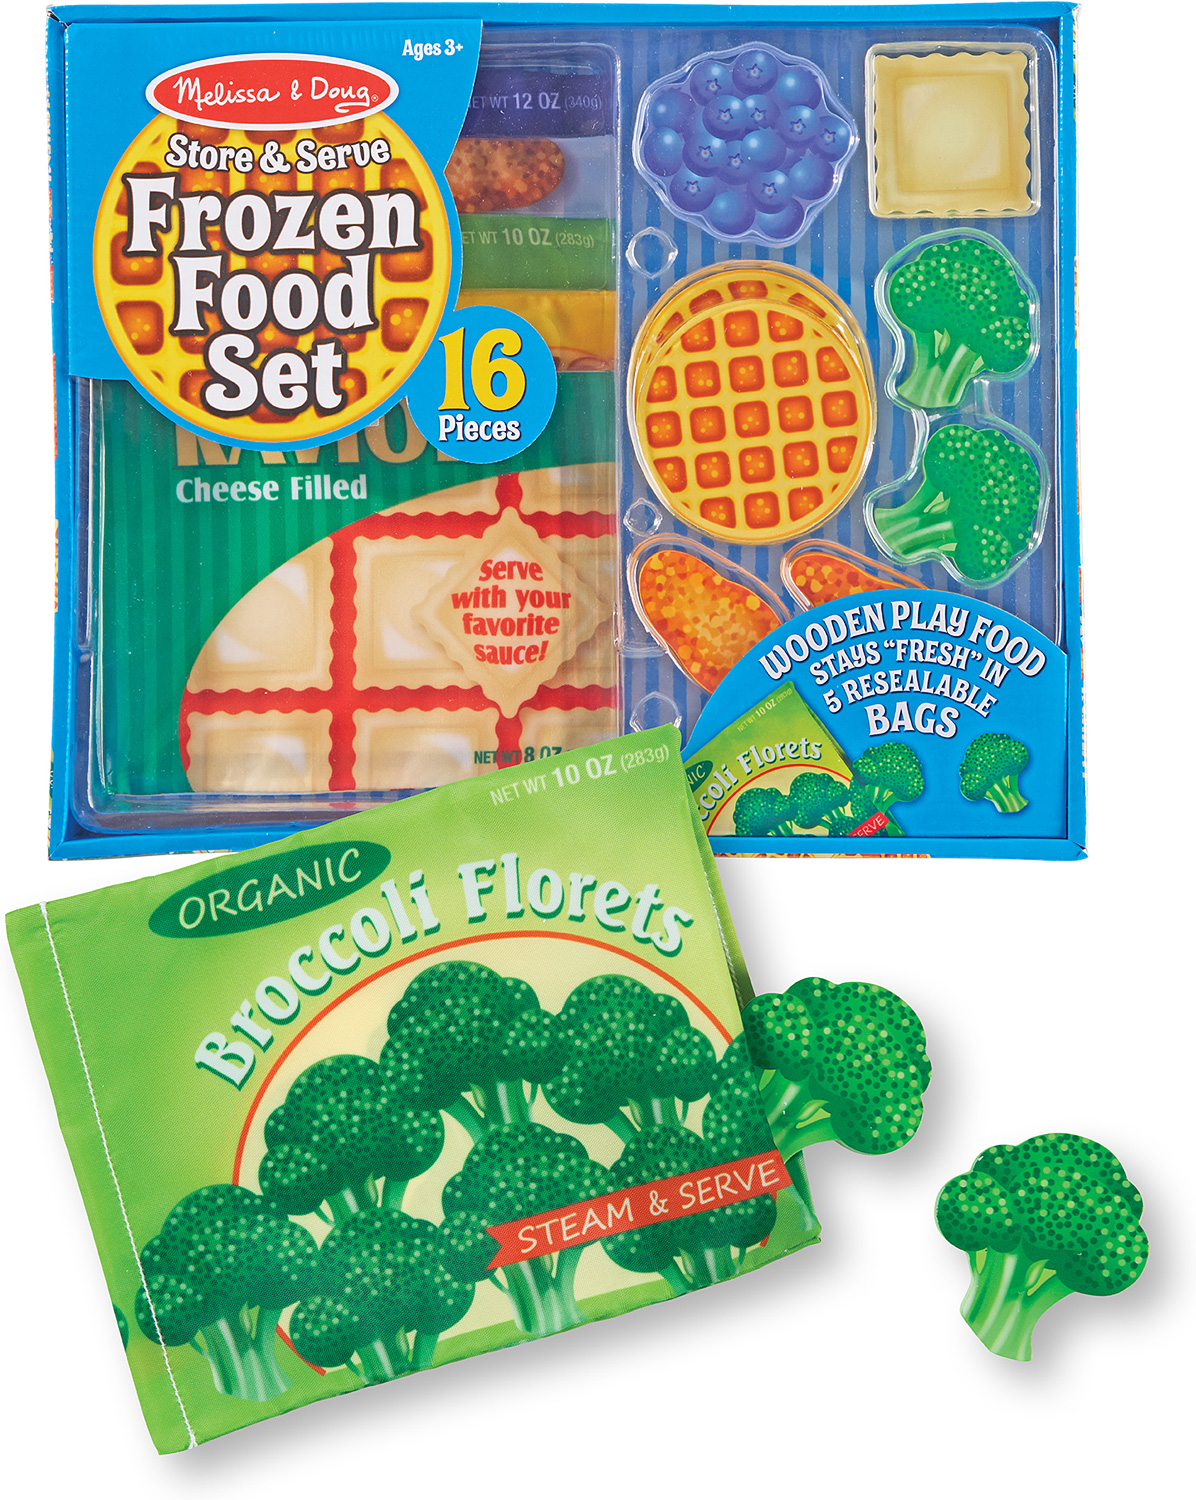 MELISSA & DOUG STORE AND SERVE FROZEN FOOD SET NEW IN ORIGINAL SEALED PACKAGE